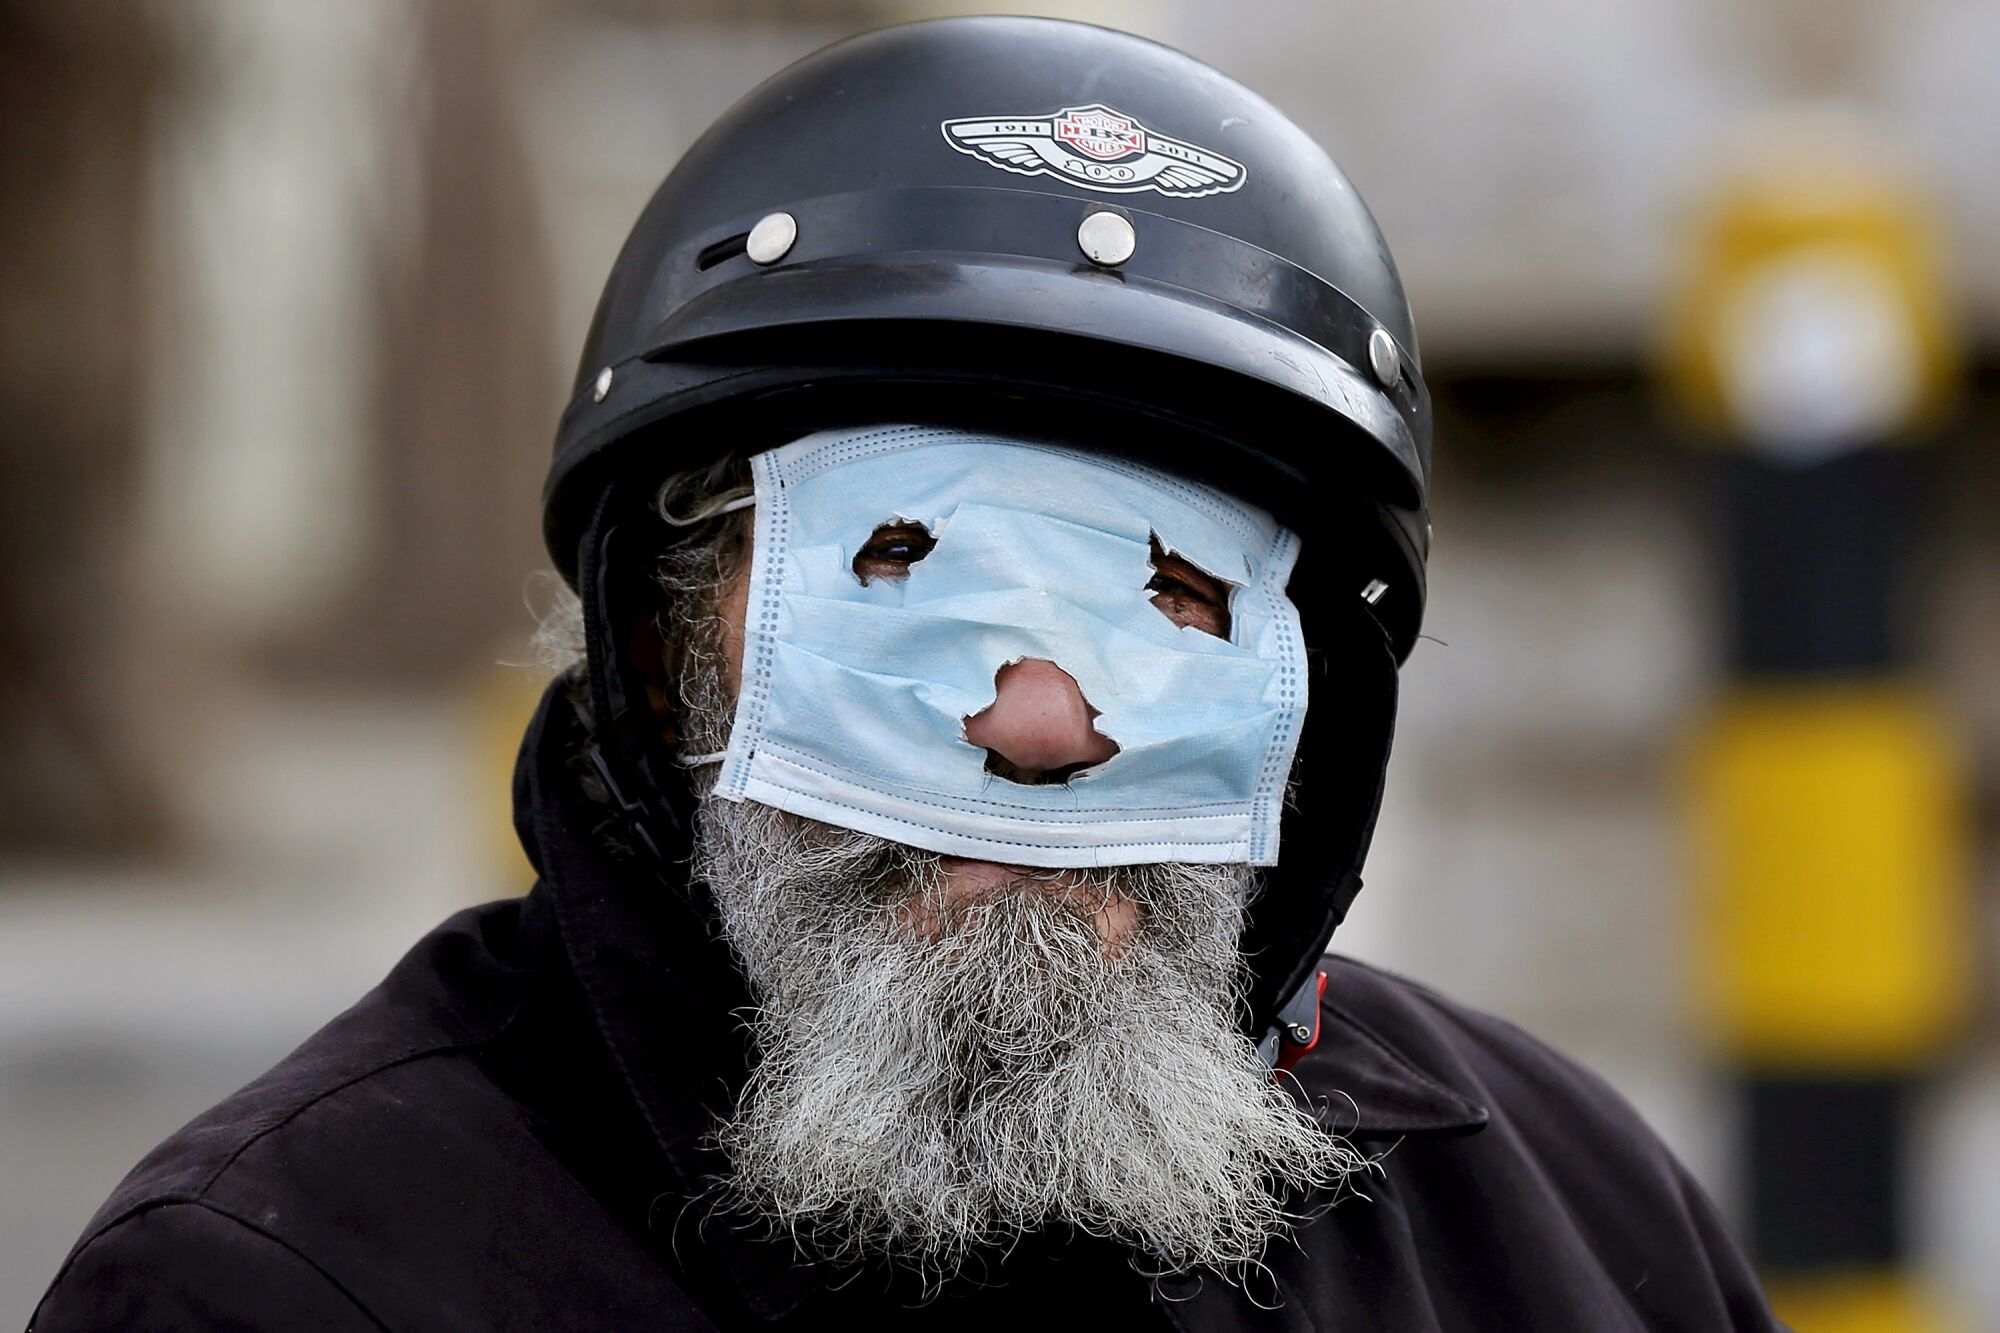 LEBANON: A bearded man covers his face with a punched-out surgical mask in Beirut.